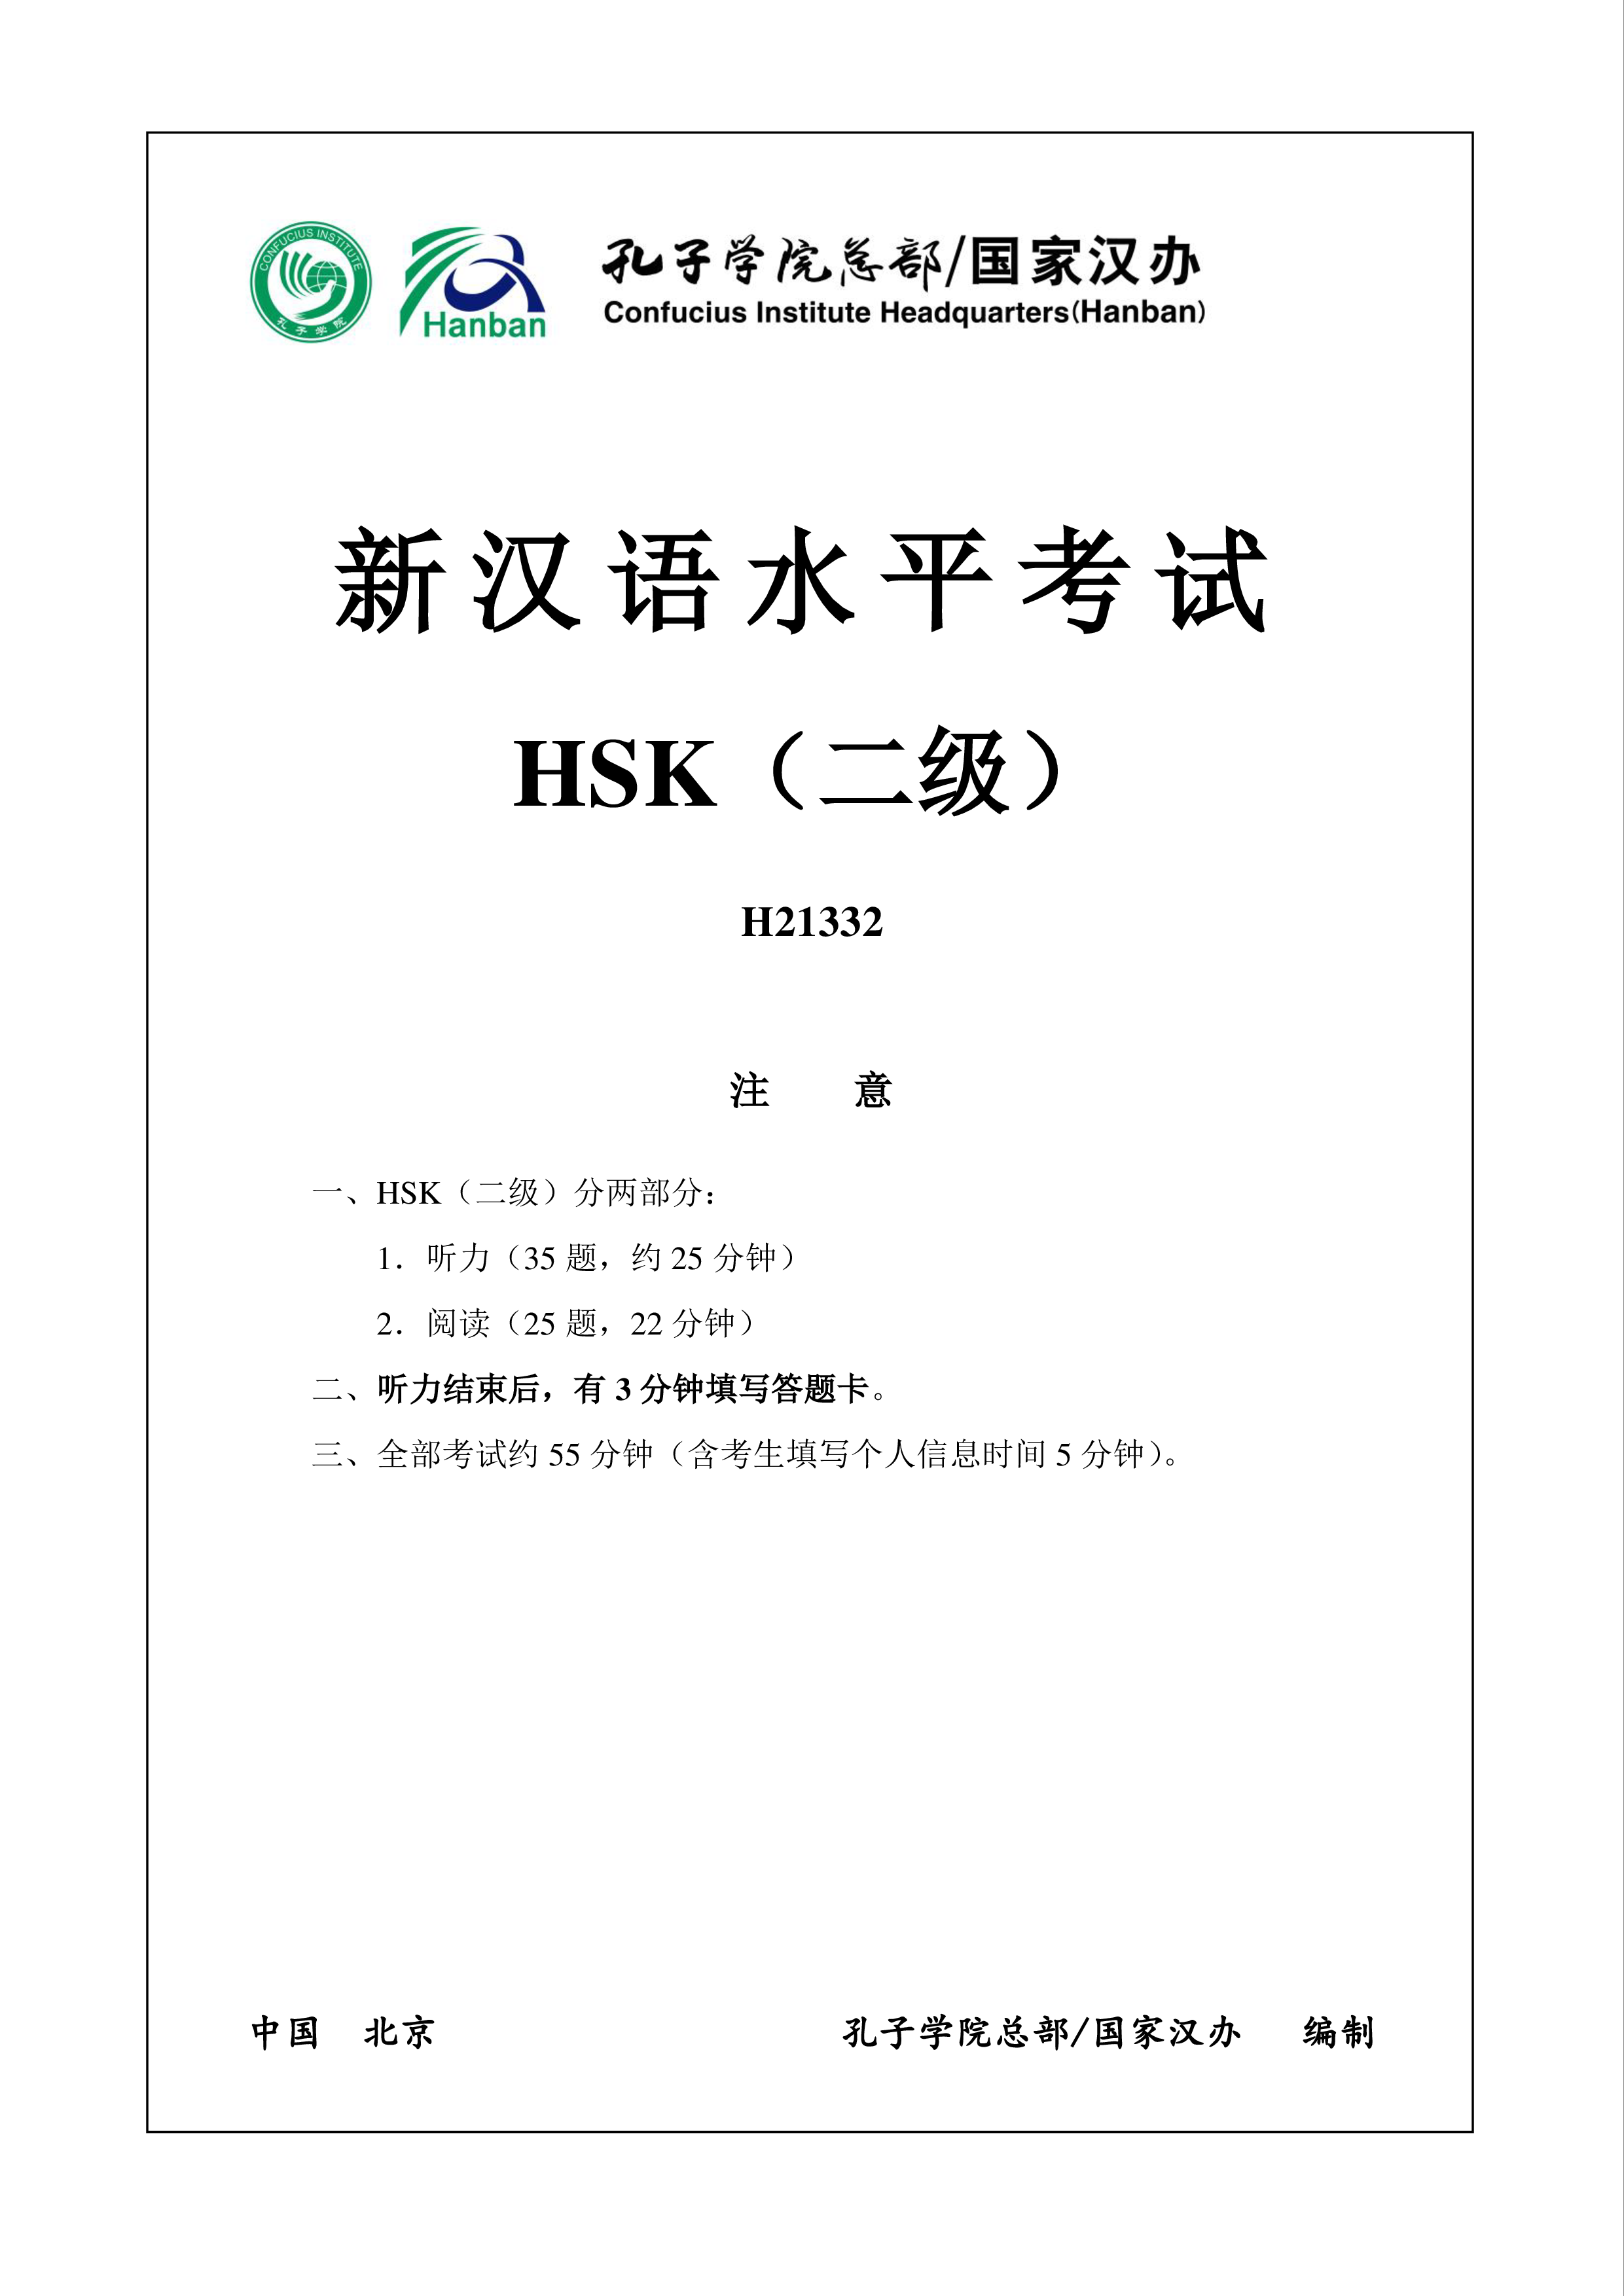 HSK2 Chinese Exam including Answers # HSK2 H21332 模板